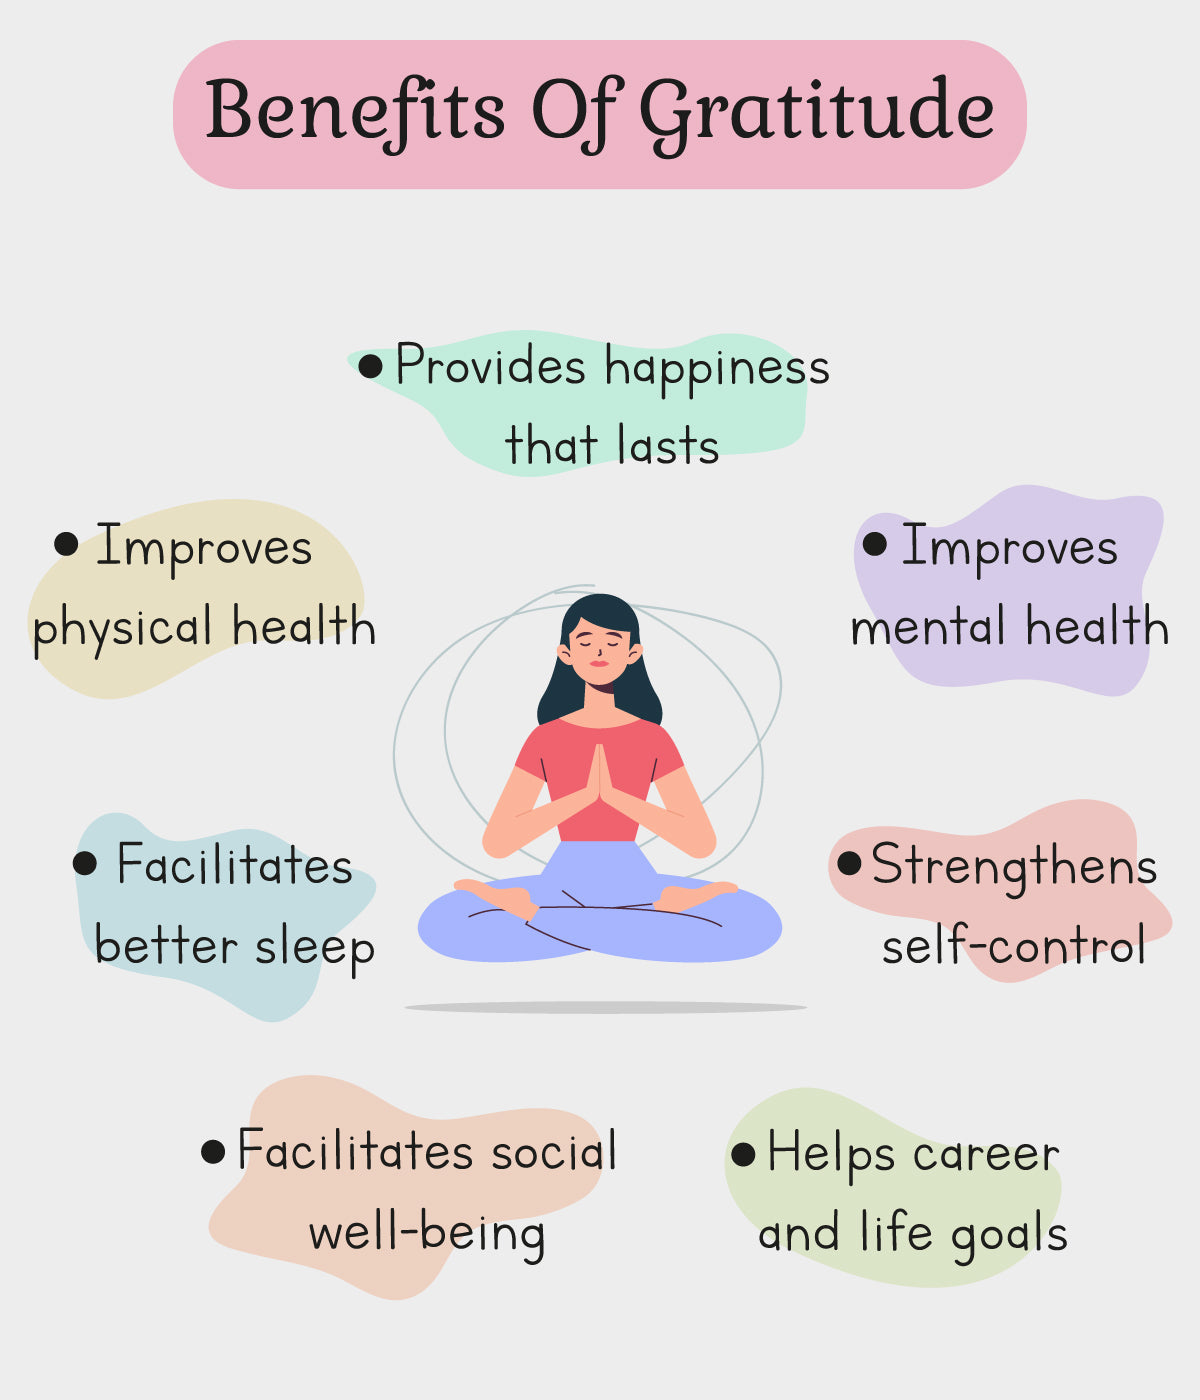 The Health Benefits of Positive Thinking and Gratitude